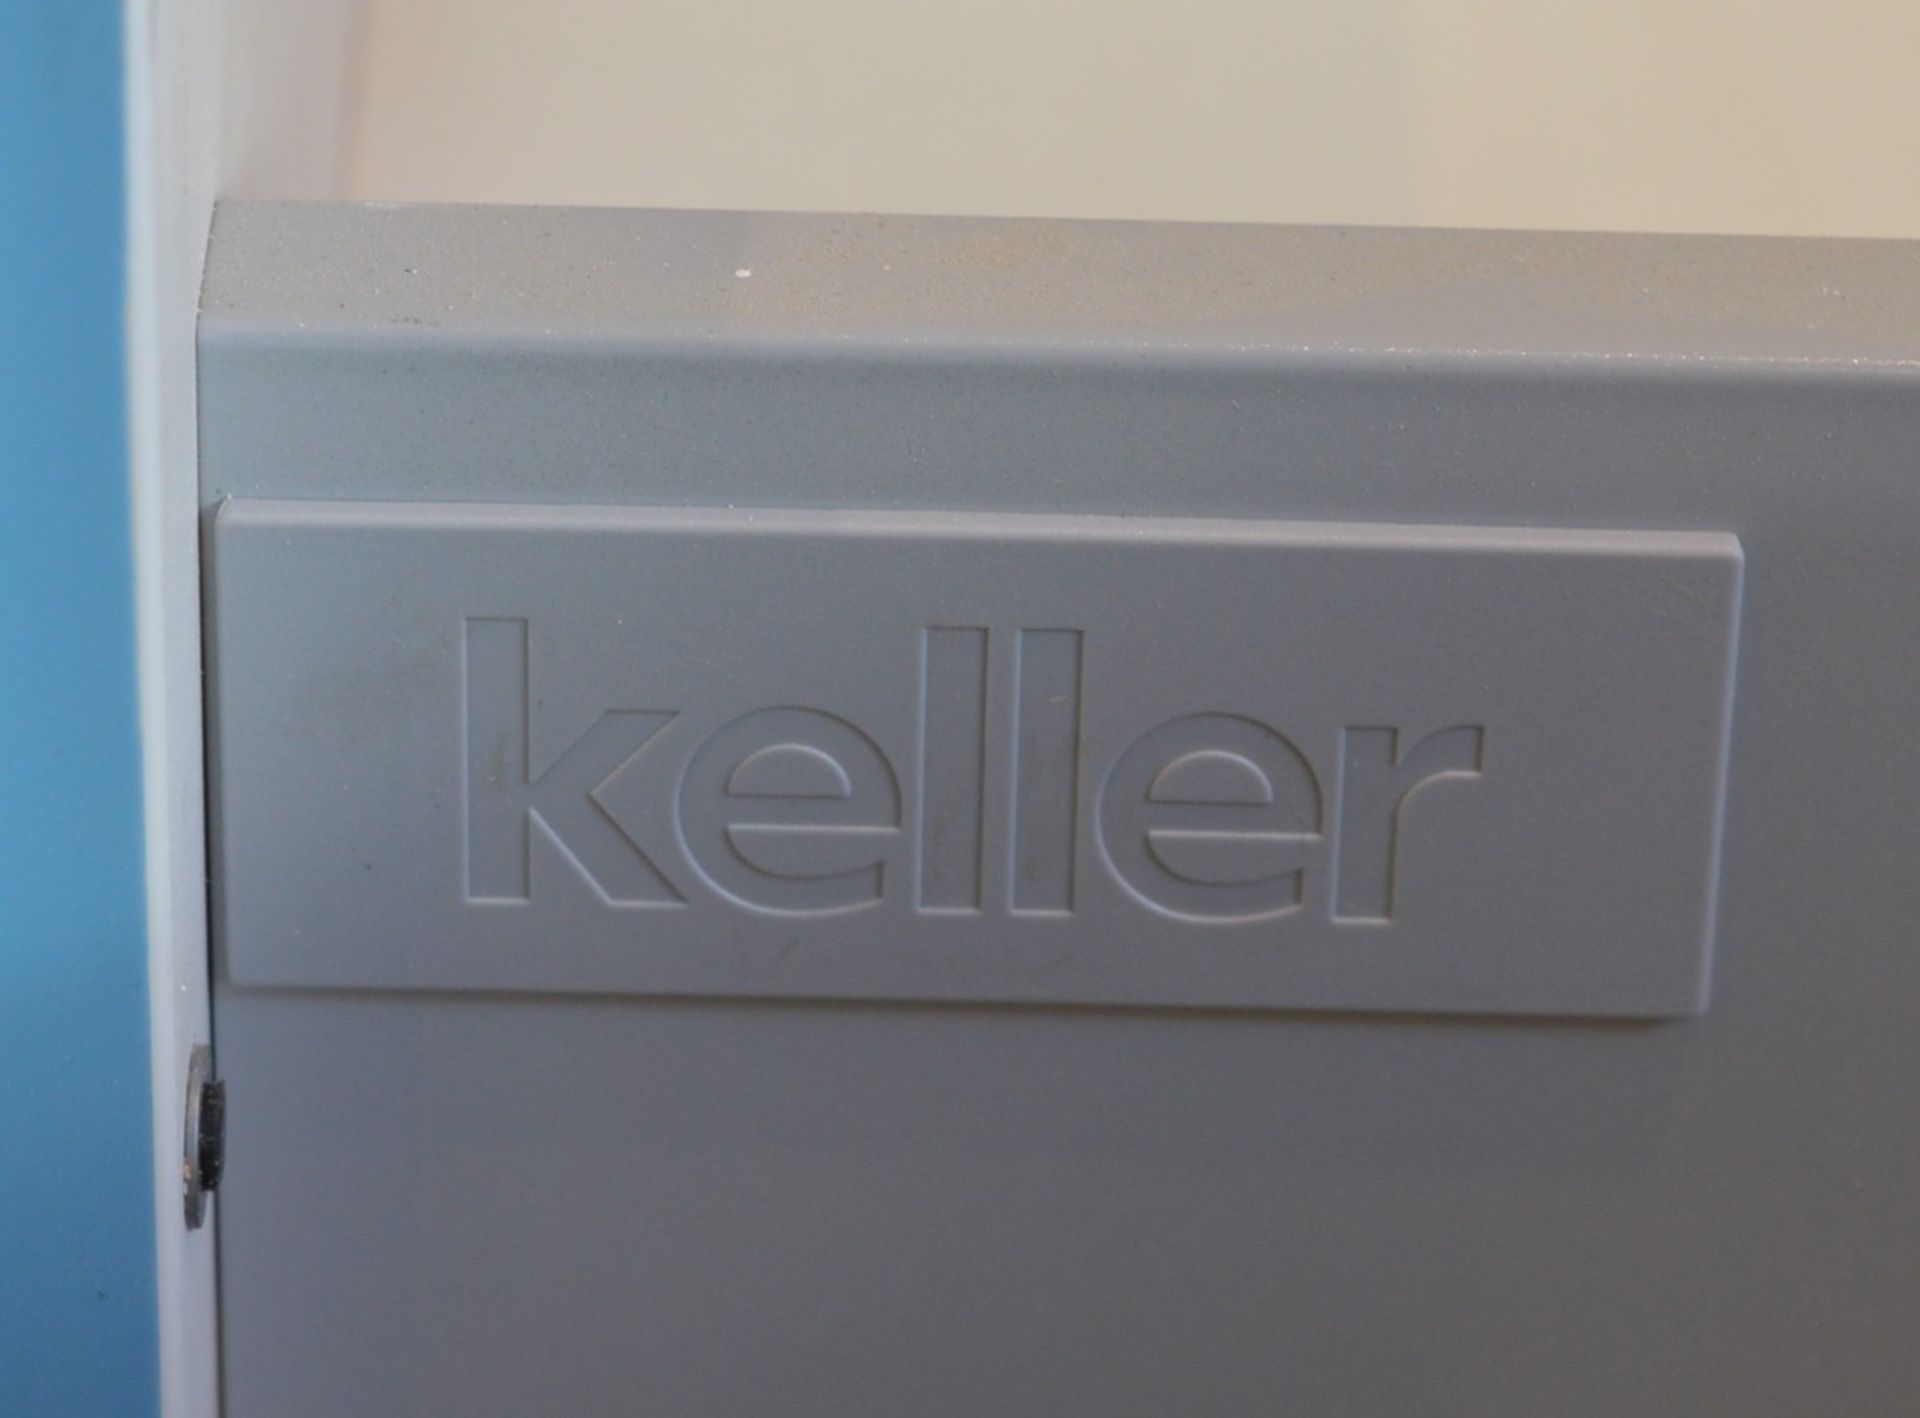 1 x Selection of Keller High Gloss Kitchen Utility Units With Corian Worktop - Image 18 of 49